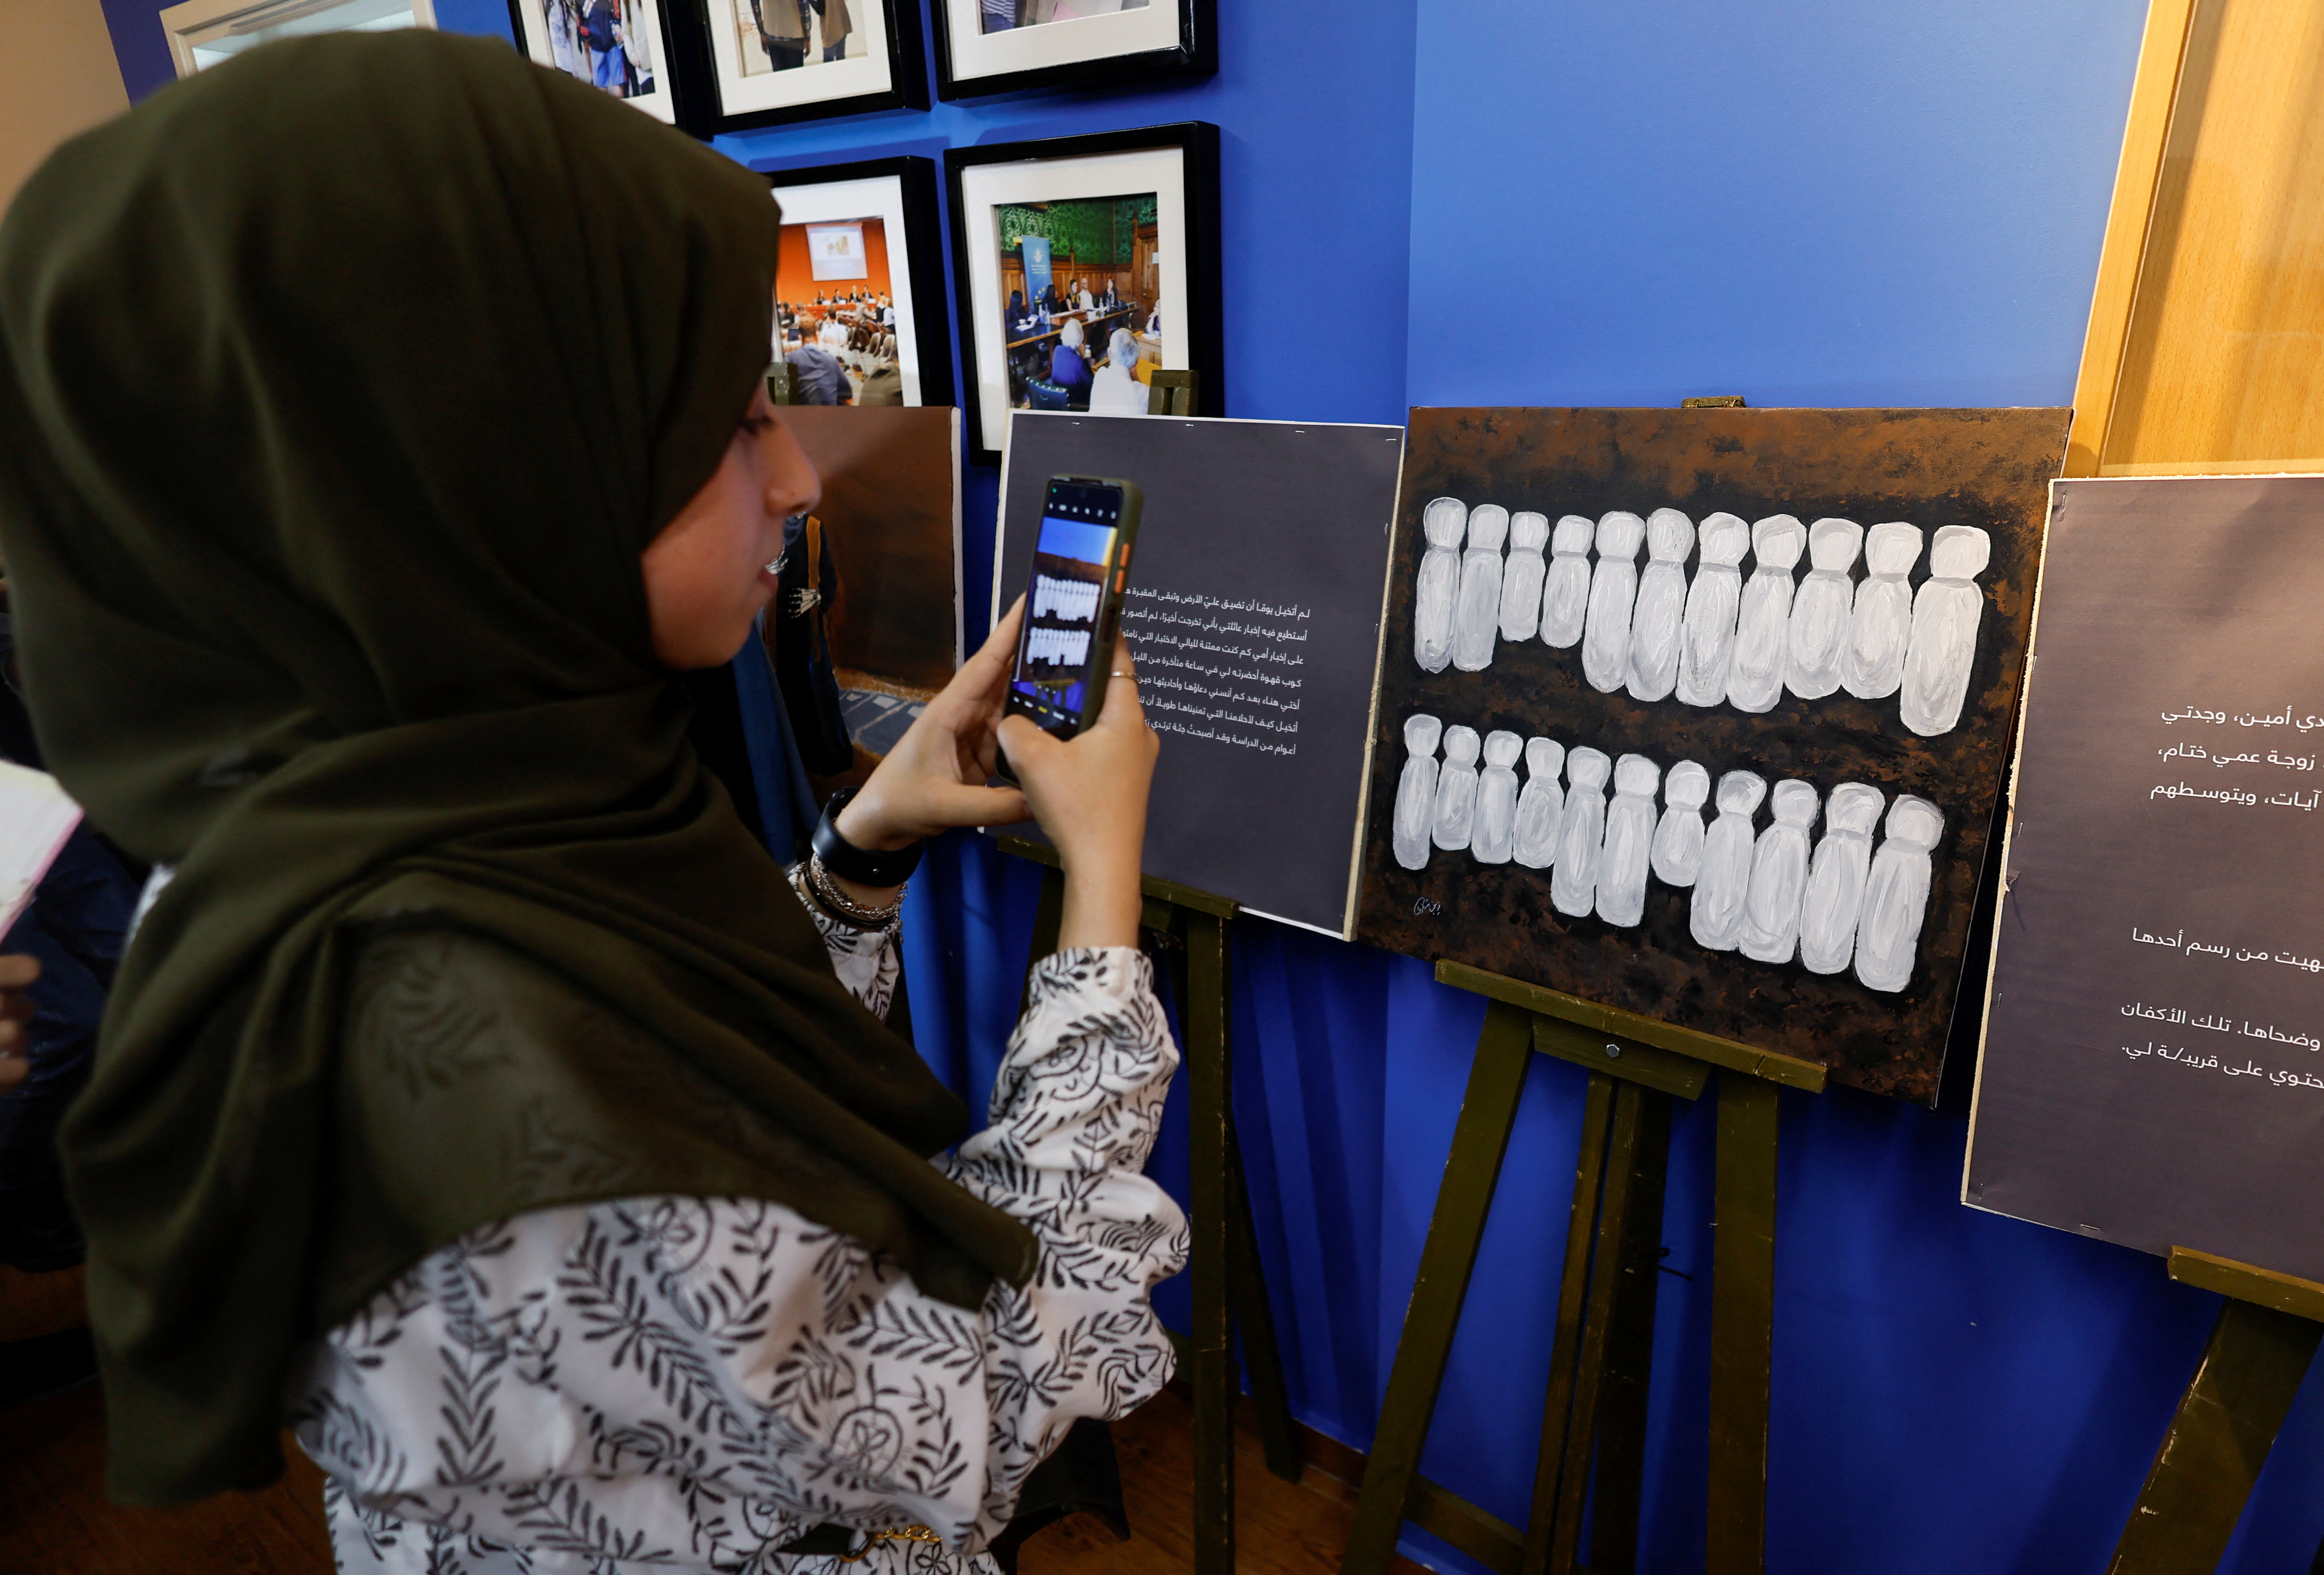 22-year-old Gazan paints about loss of 22 people to war